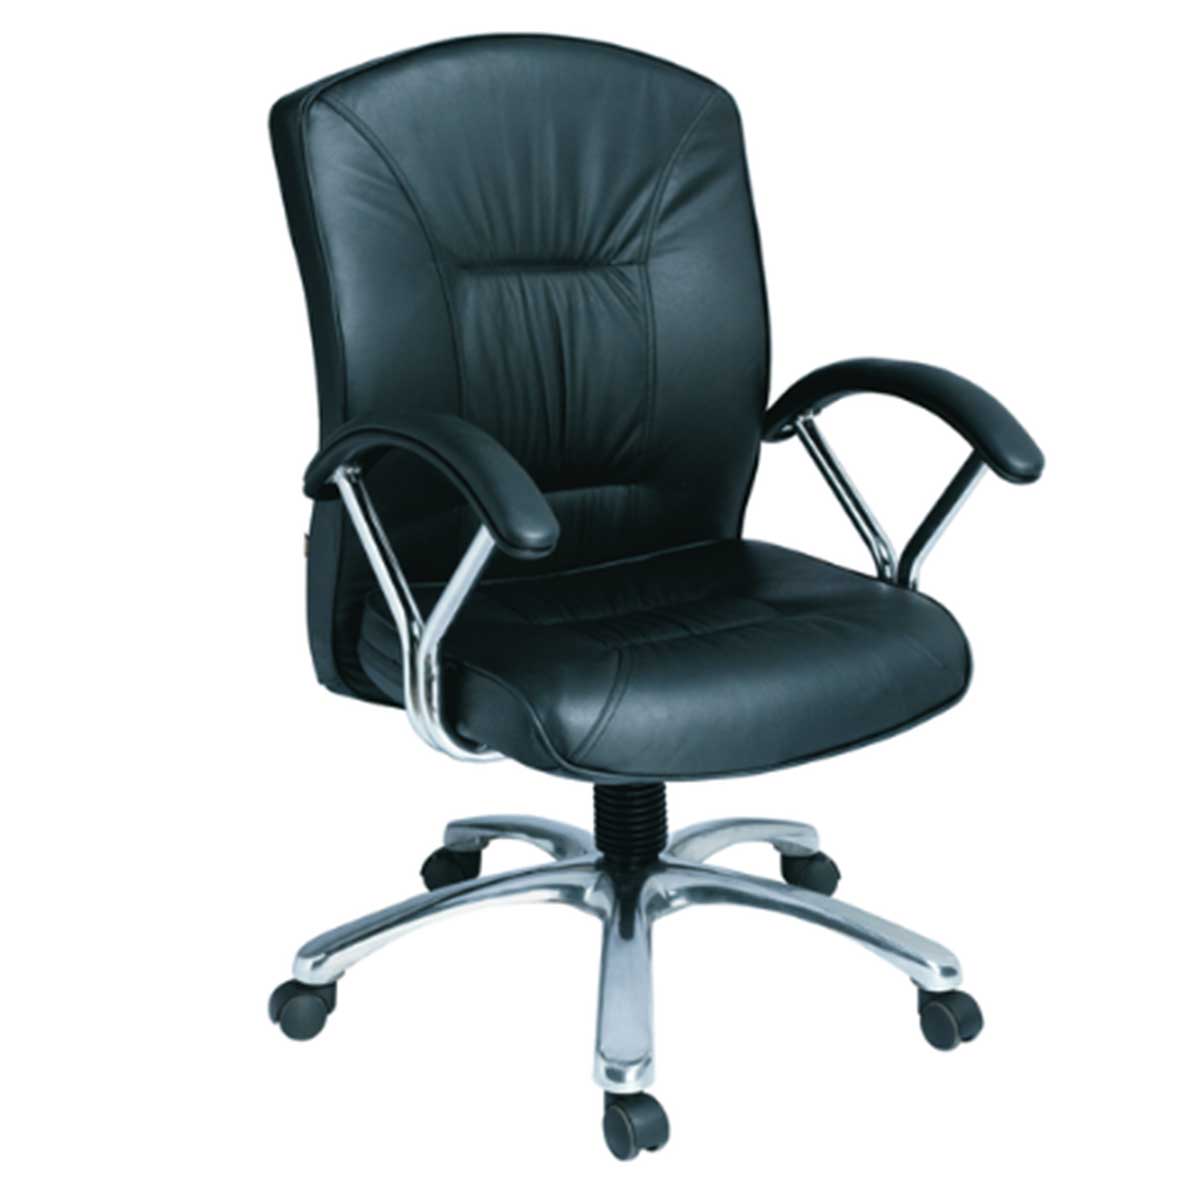 Executive Chair Manufacturers, Suppliers in Vishal Enclave